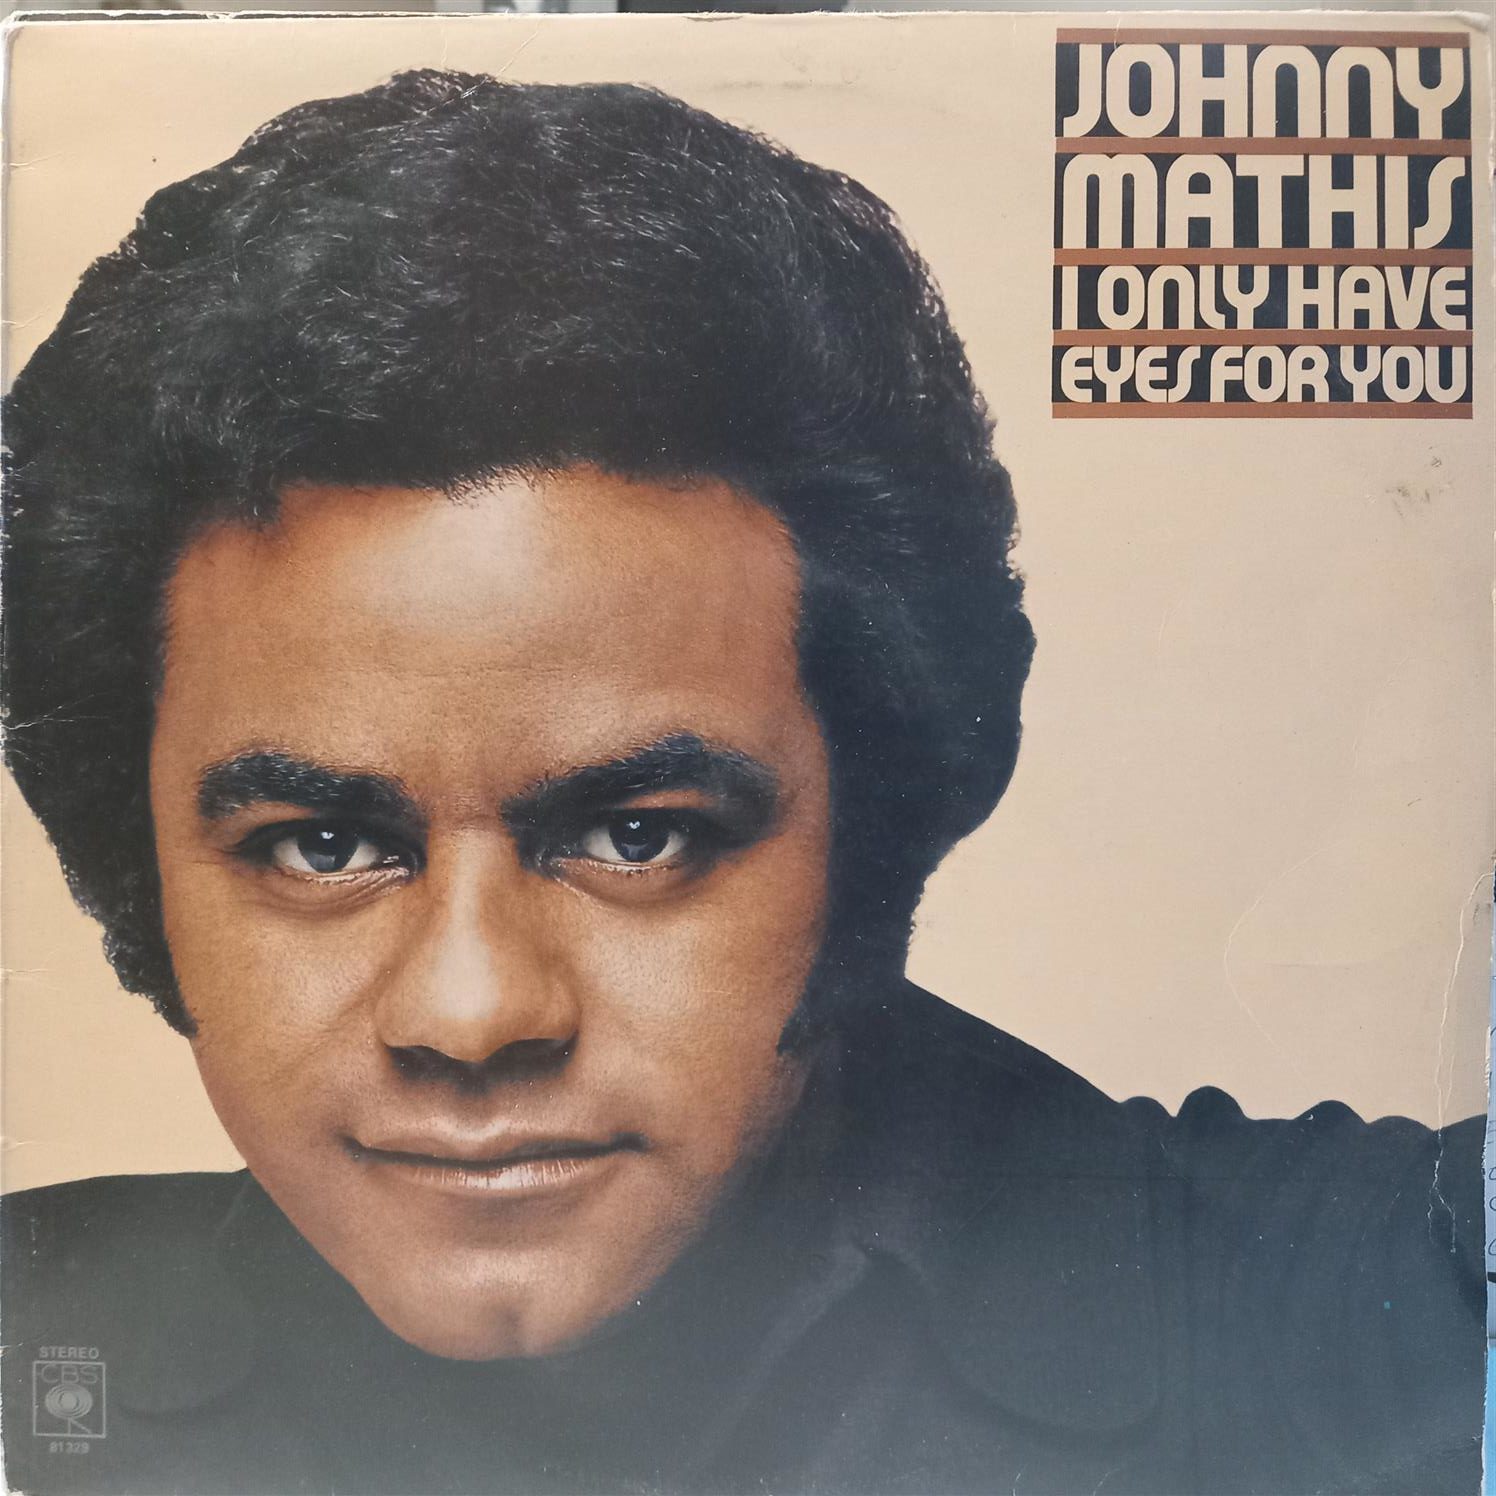 JOHNNY MATHIS – I ONLY HAVE EYES FOR YOU ON